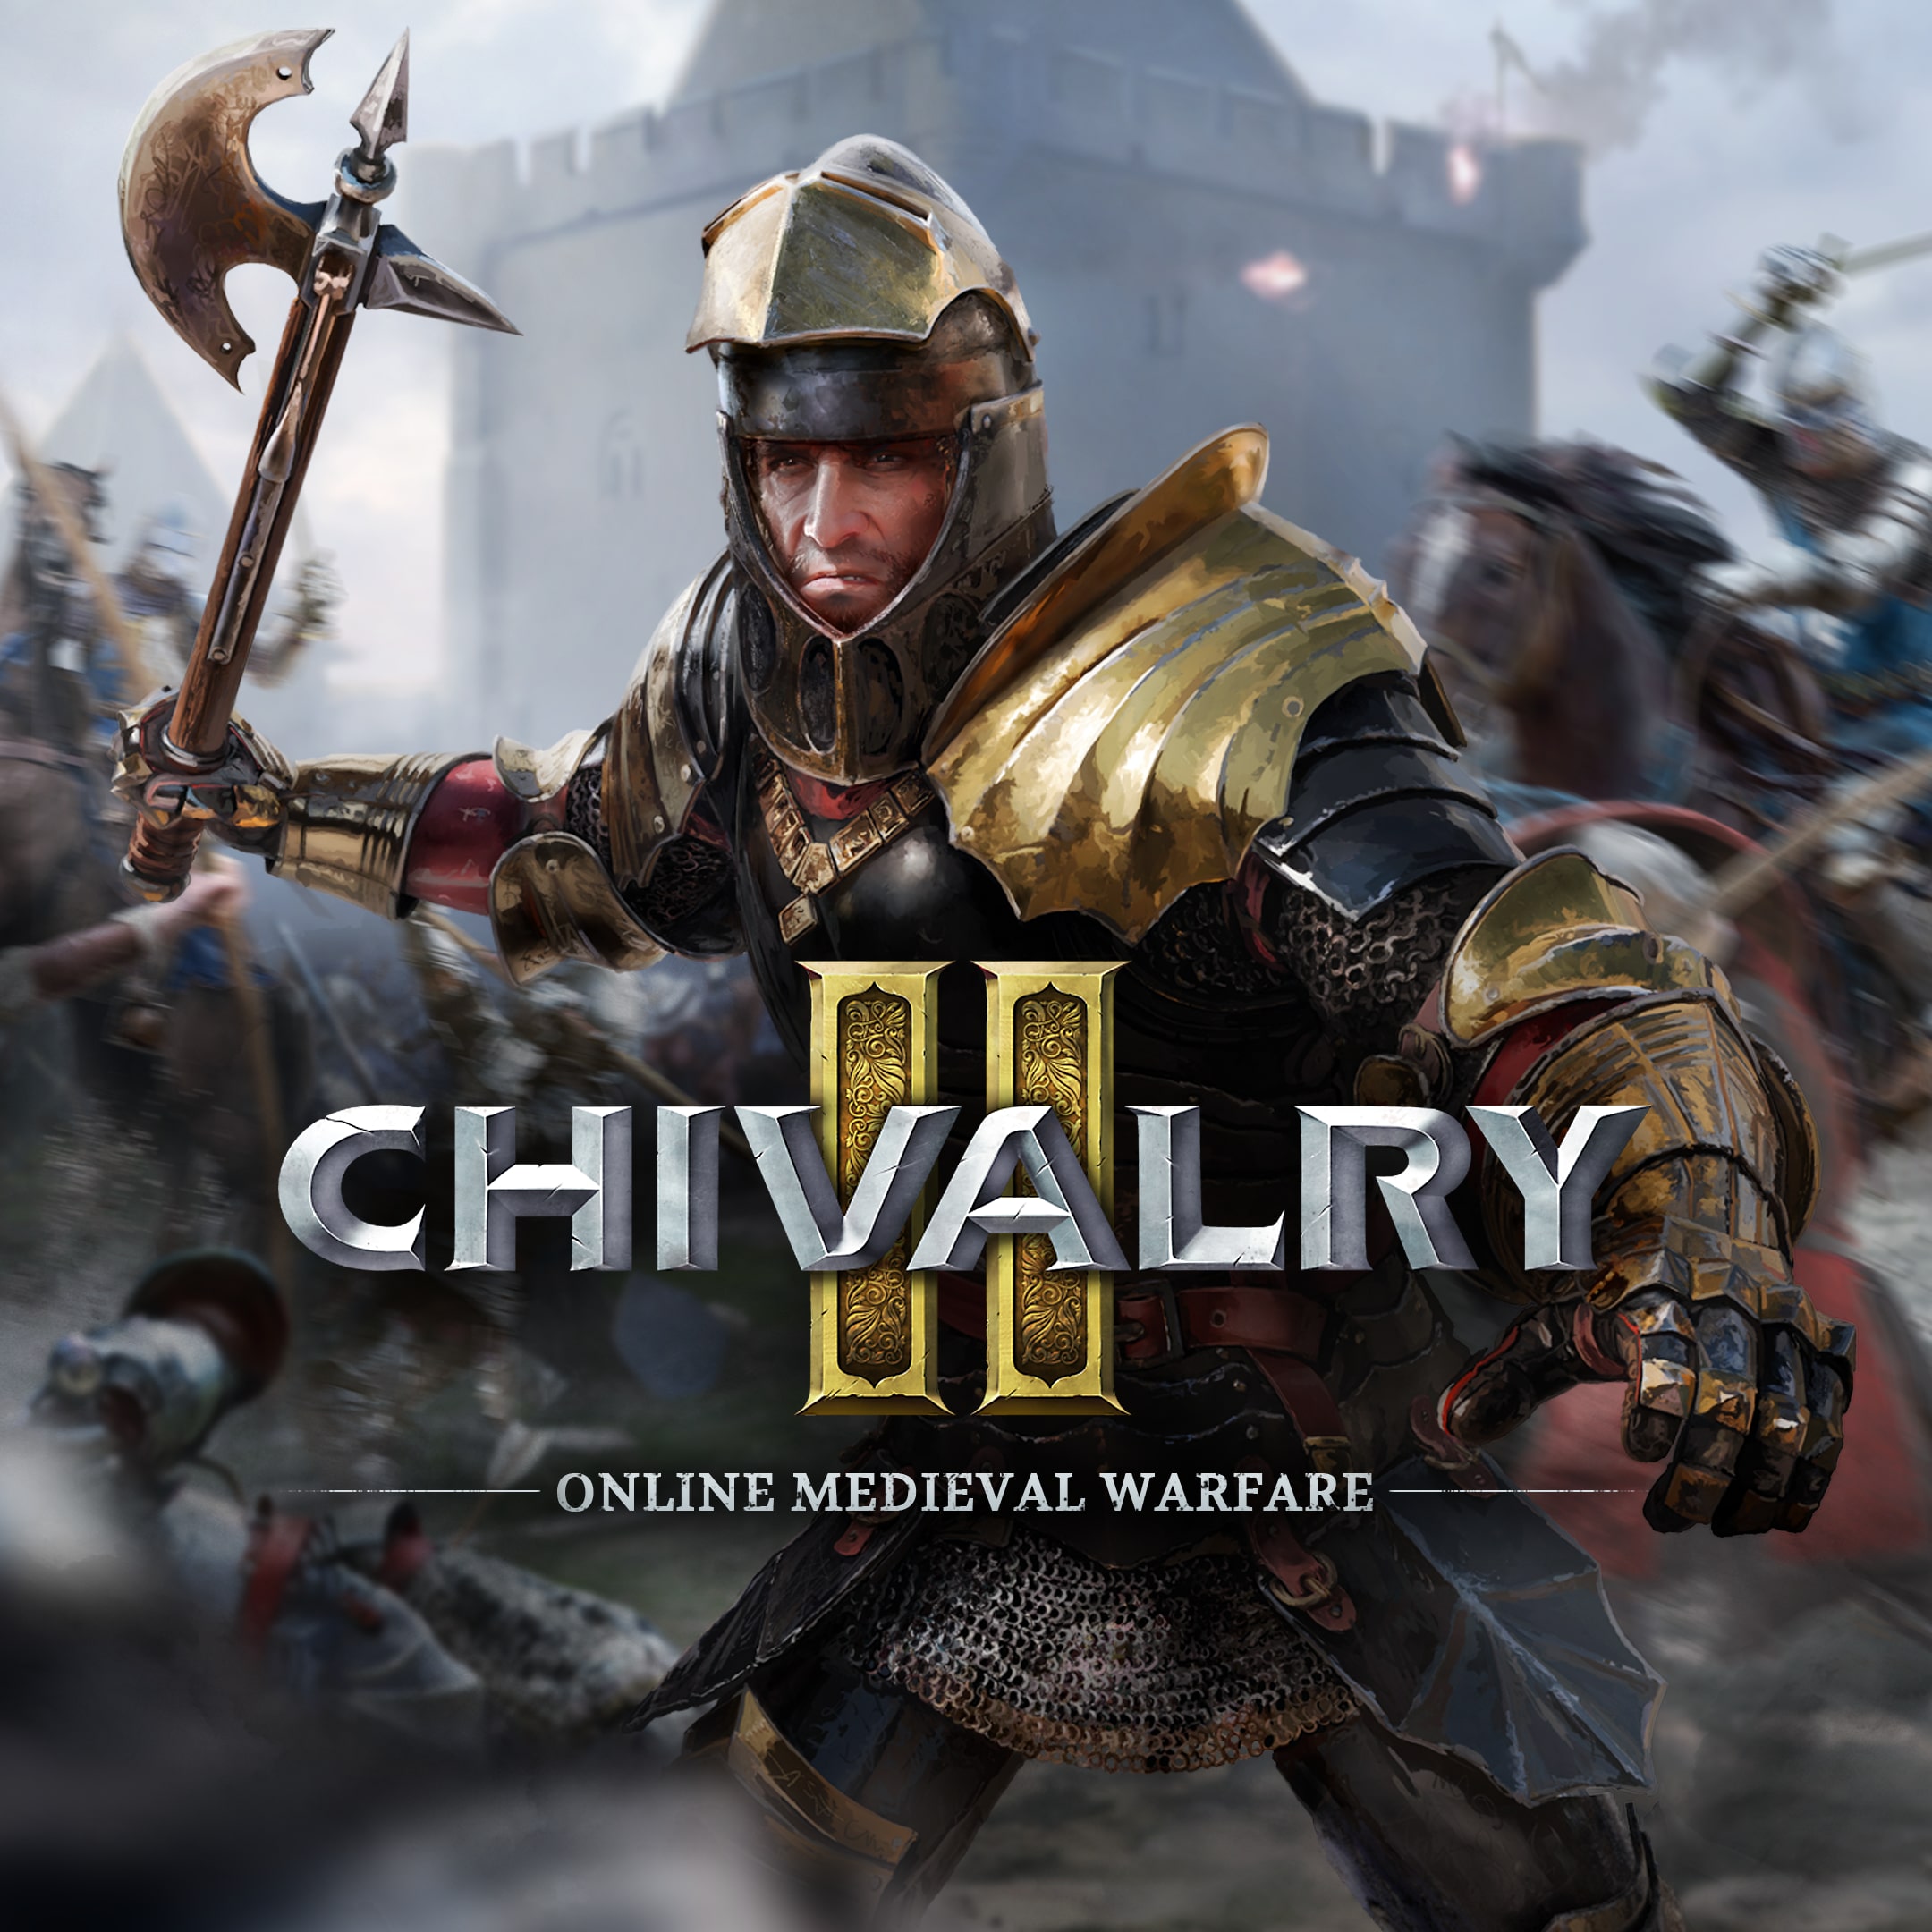 Chivalry 2 crossplay – how to party up on PC, PS4, PS5, and Xbox